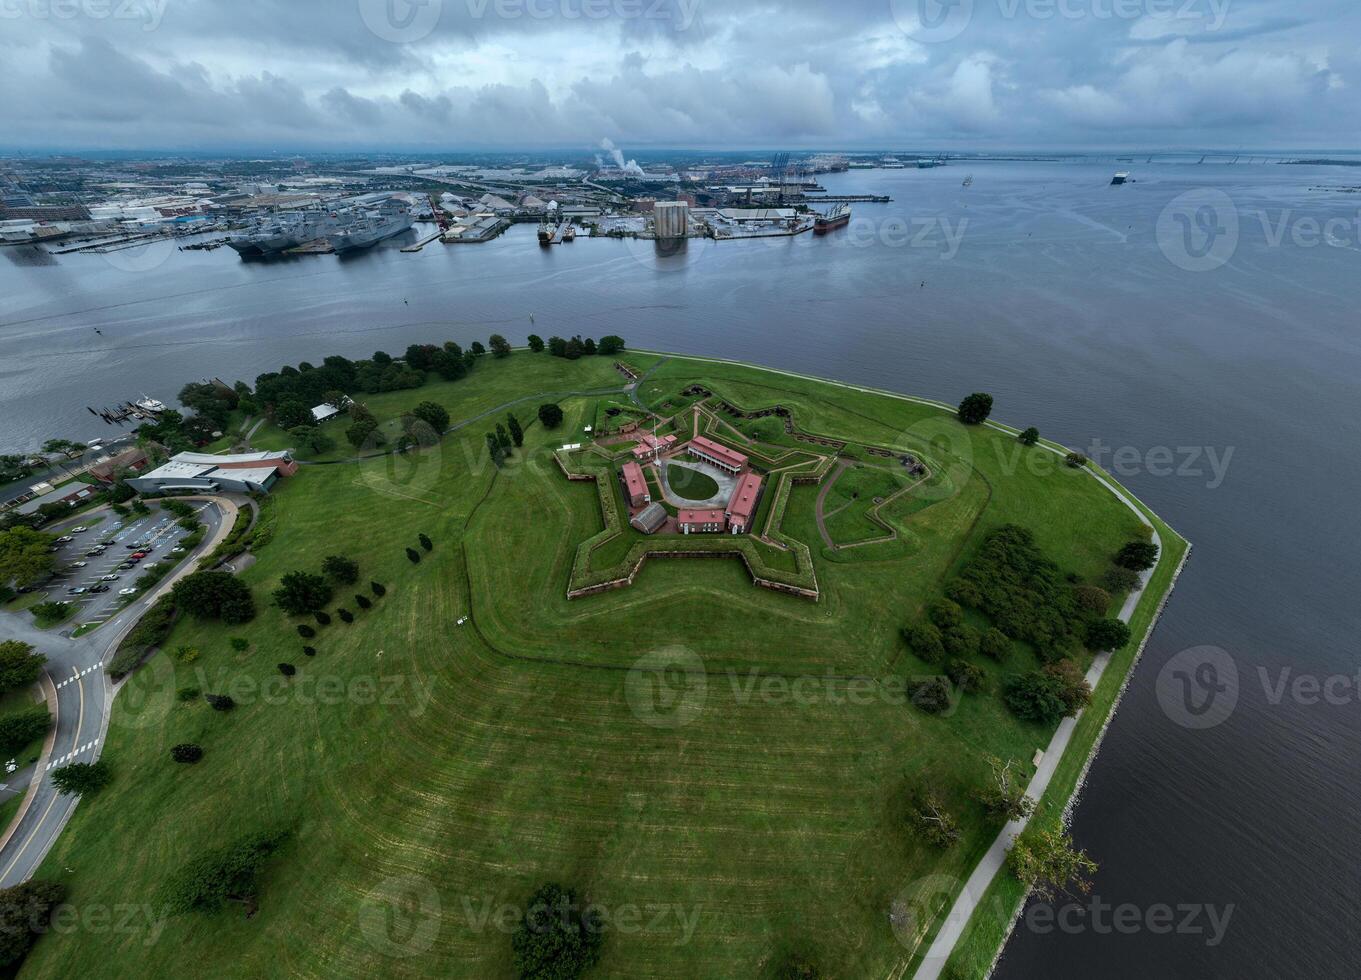 fort mchenry - Baltimore, Maryland photo